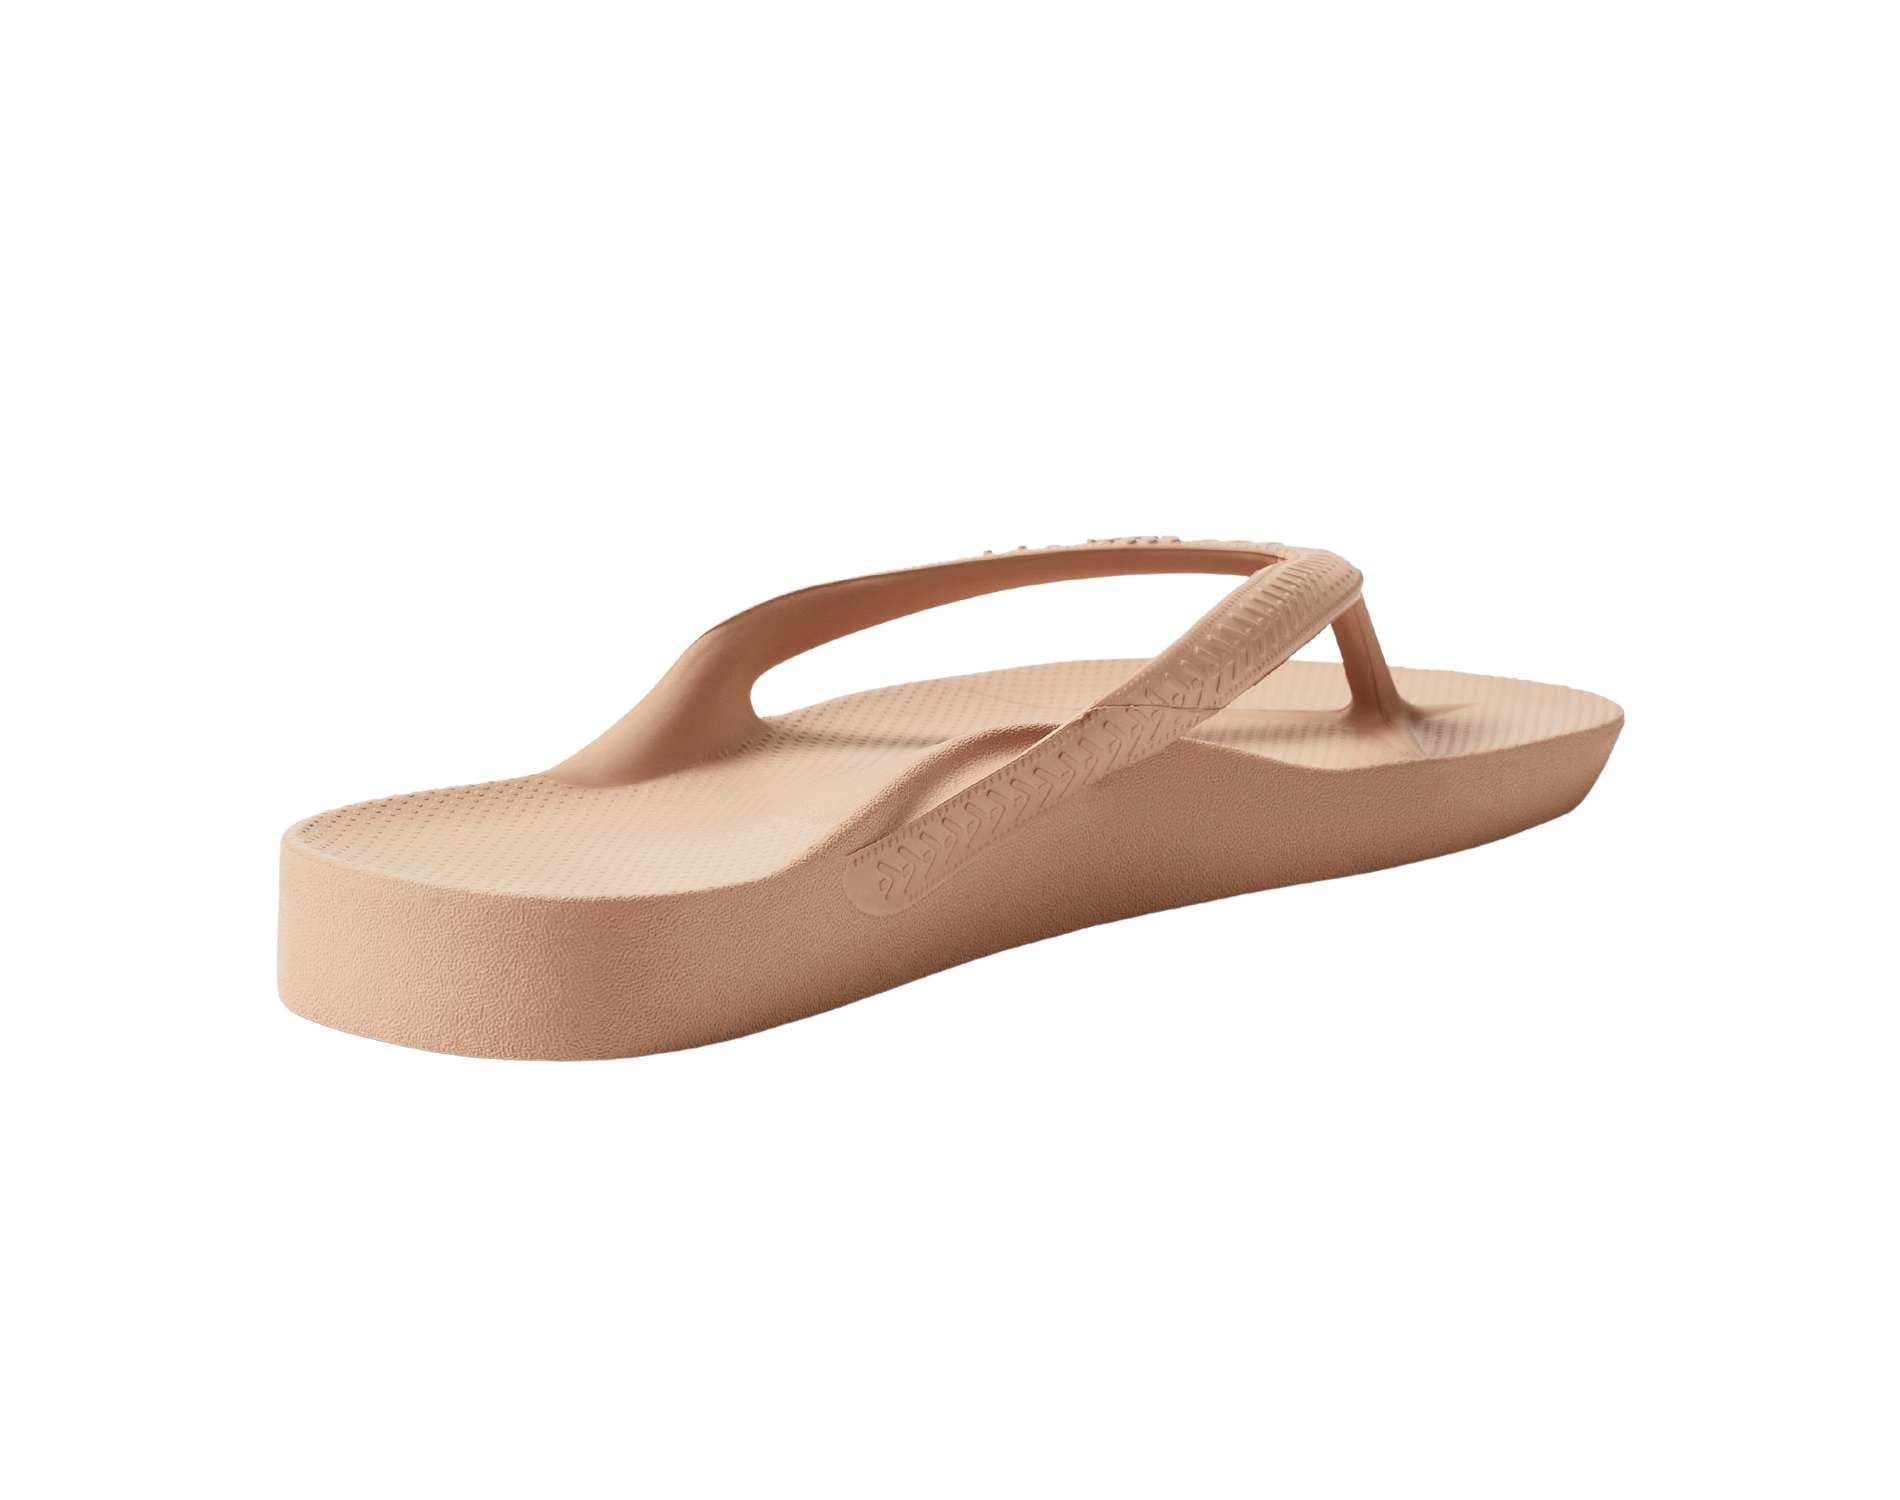 Archies arch support thongs in tan colour